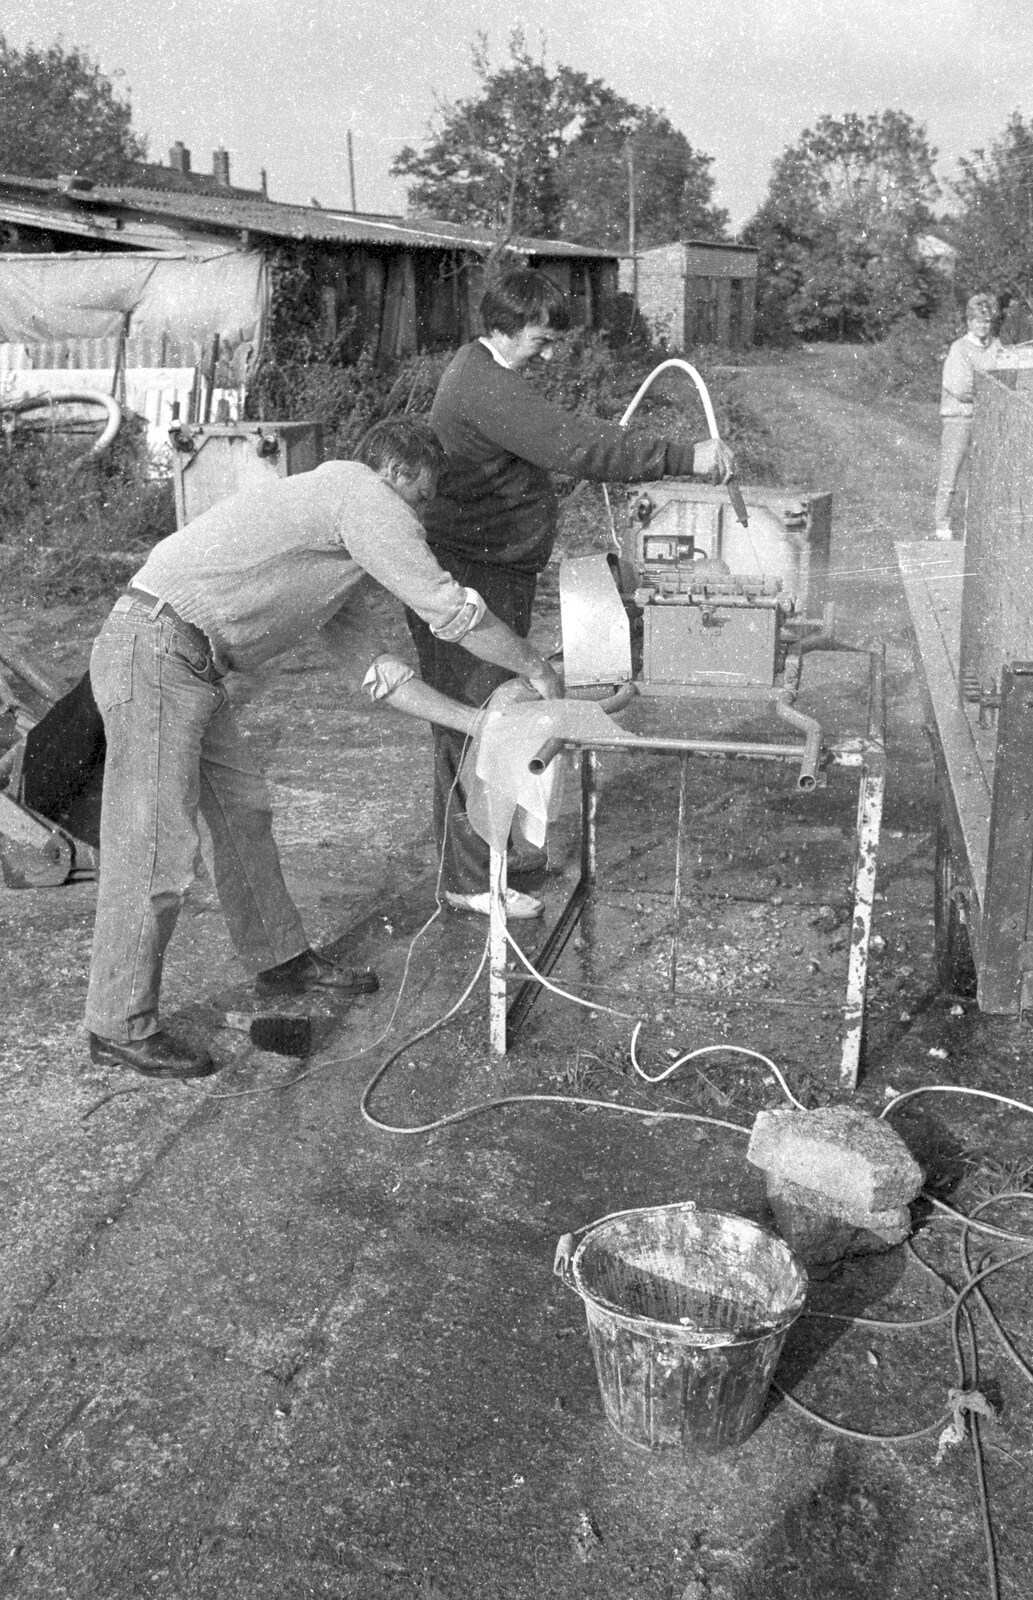 Corky cleans the pump from Cider Making in Black and White, Stuston, Suffolk - 11th October 1992